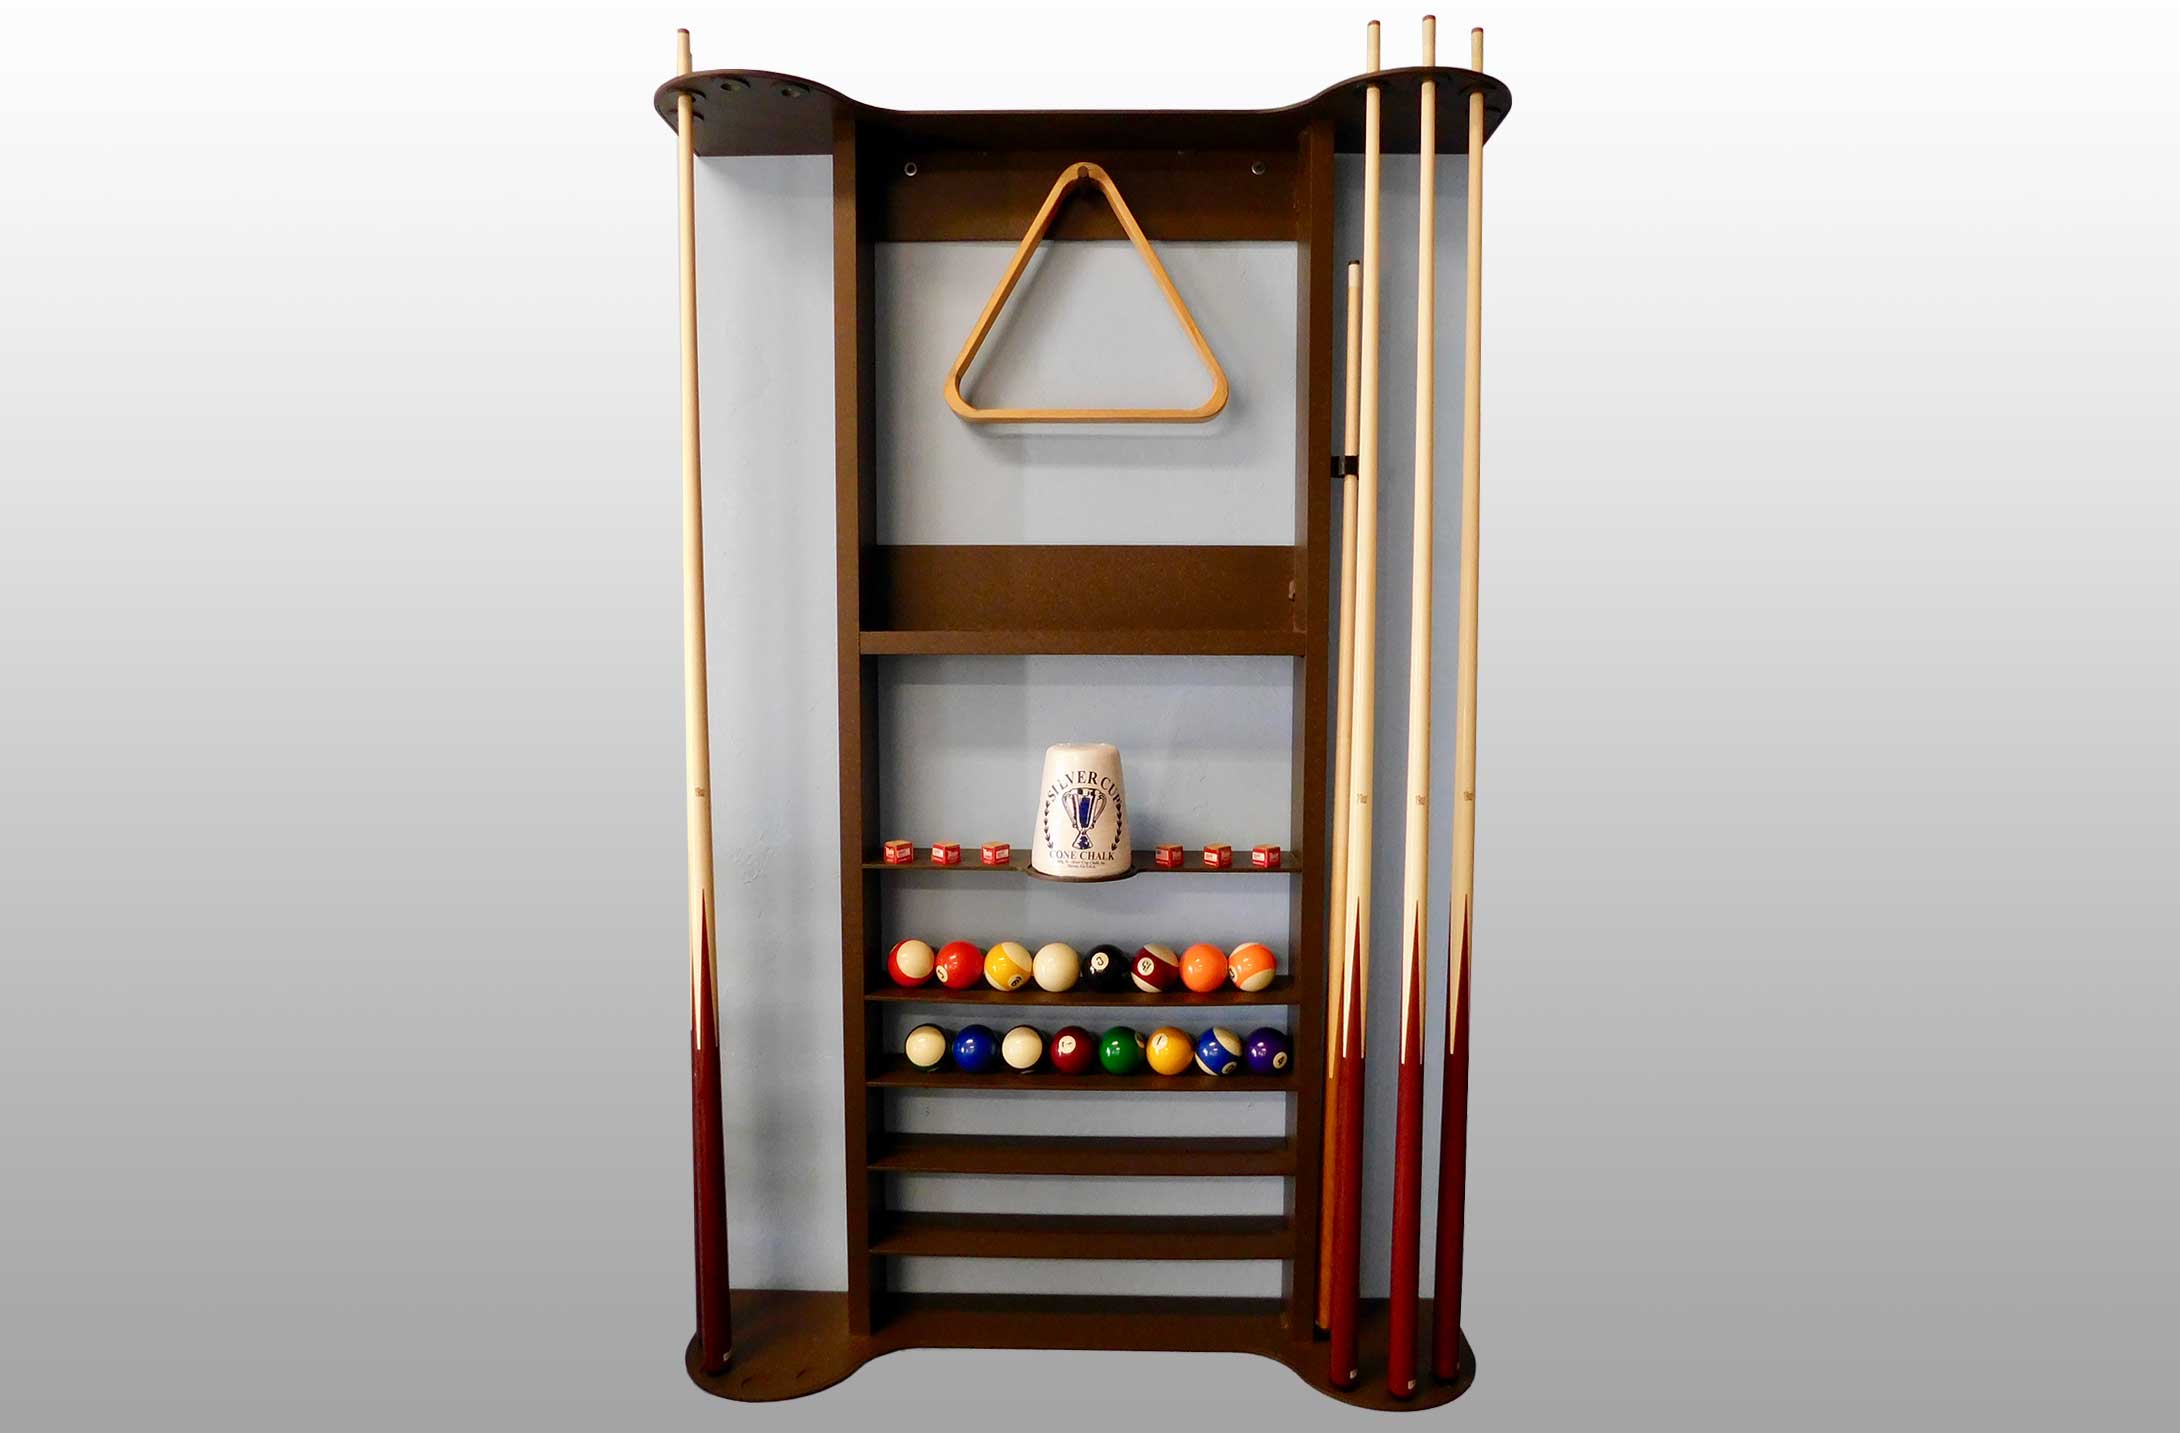 Wall mounted cue rack holder by R&R Outdoors All Weather Billiards